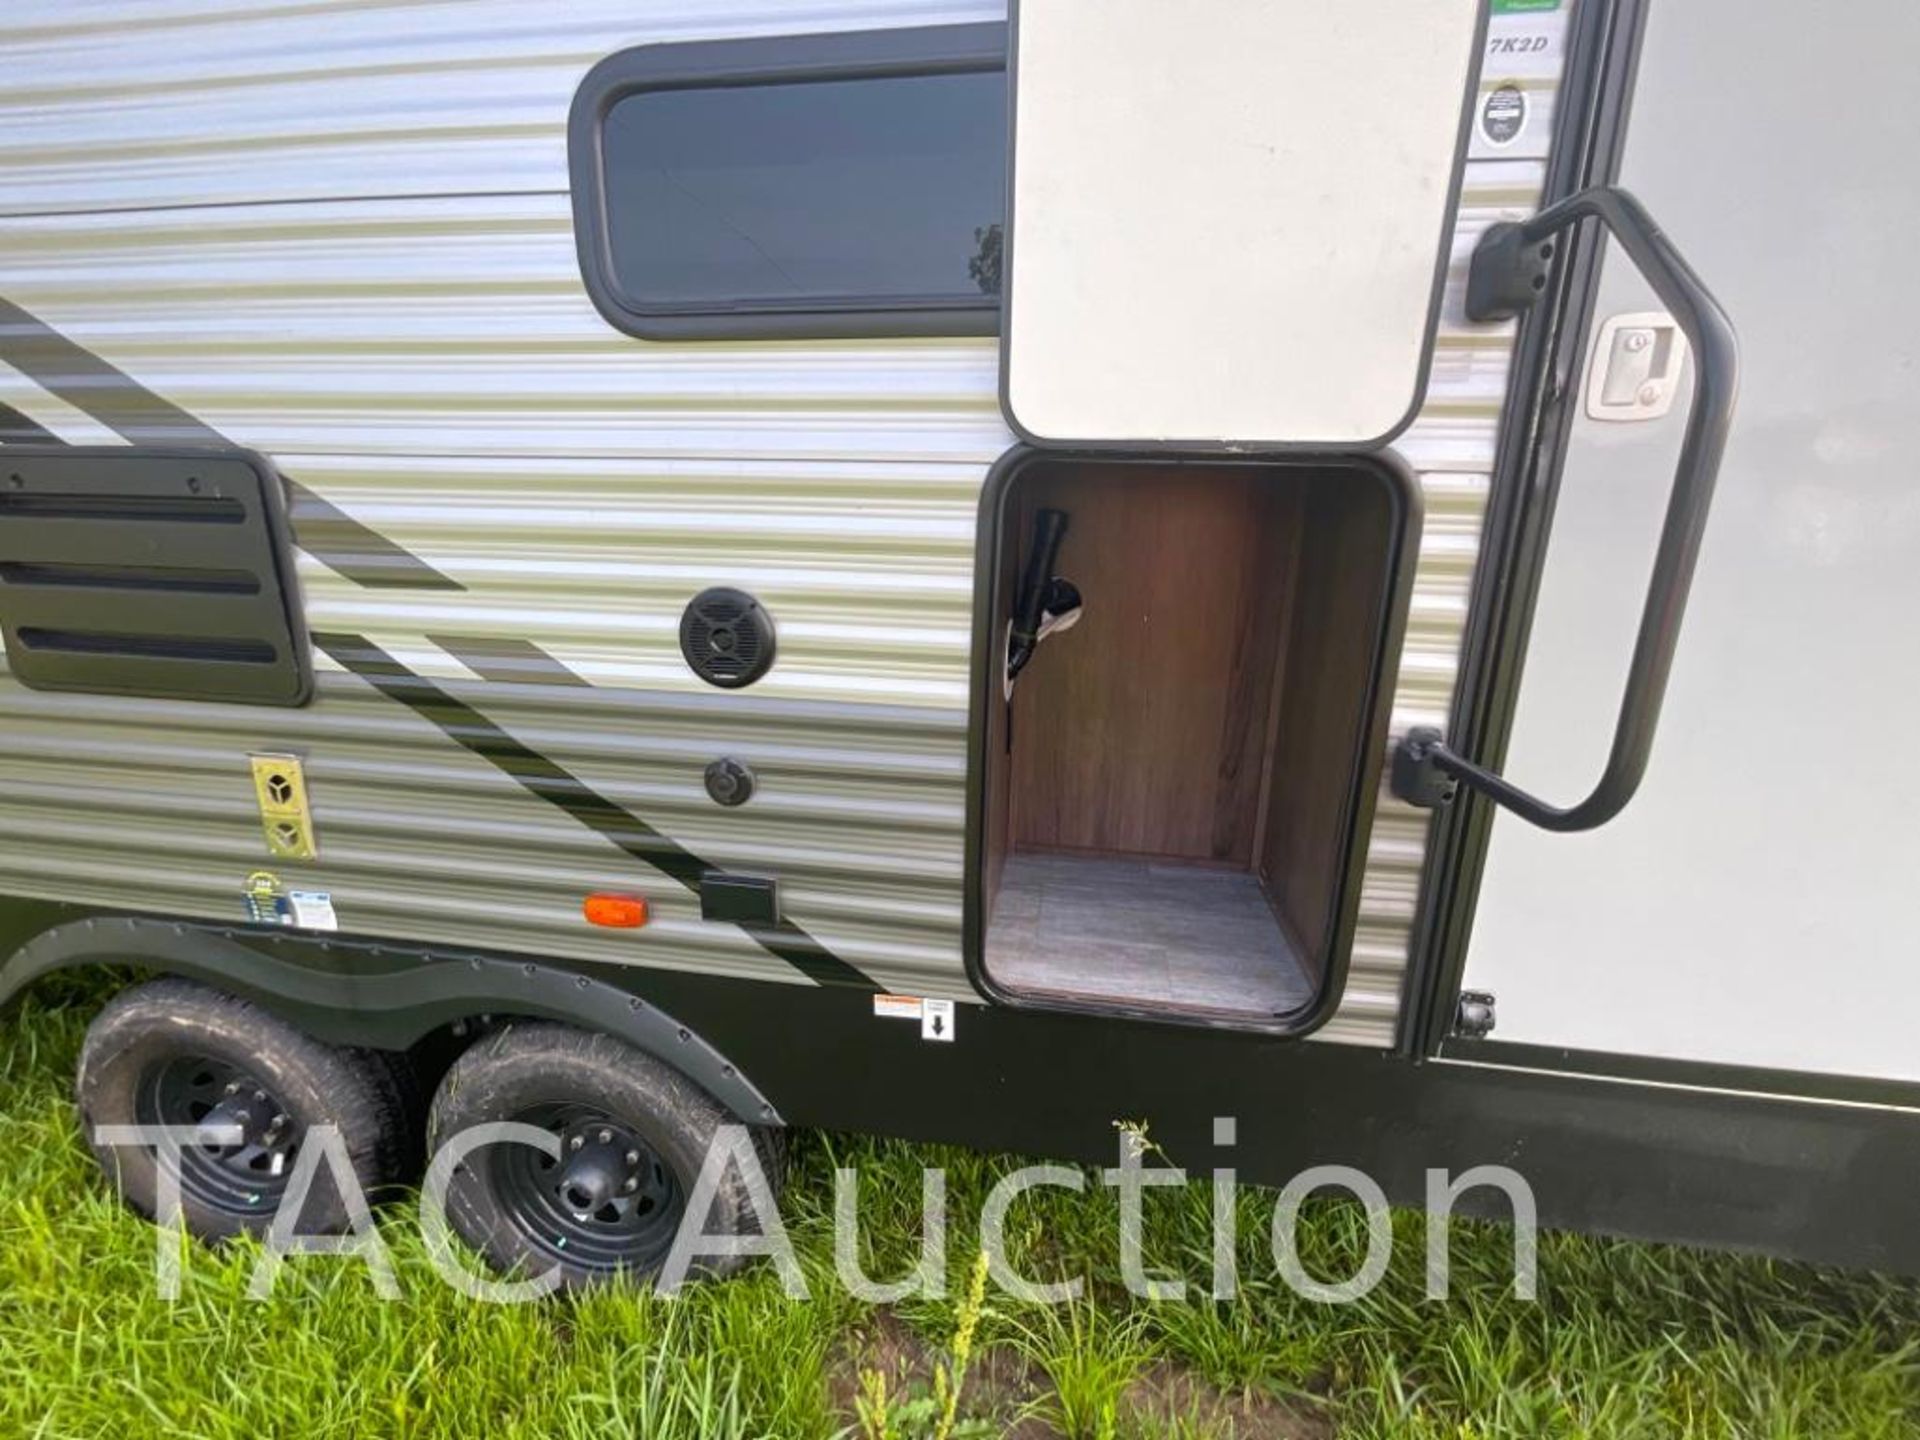 2021 Silver Lake by Forest River 27K2D 34ft Bumper Pull Camper - Image 25 of 33